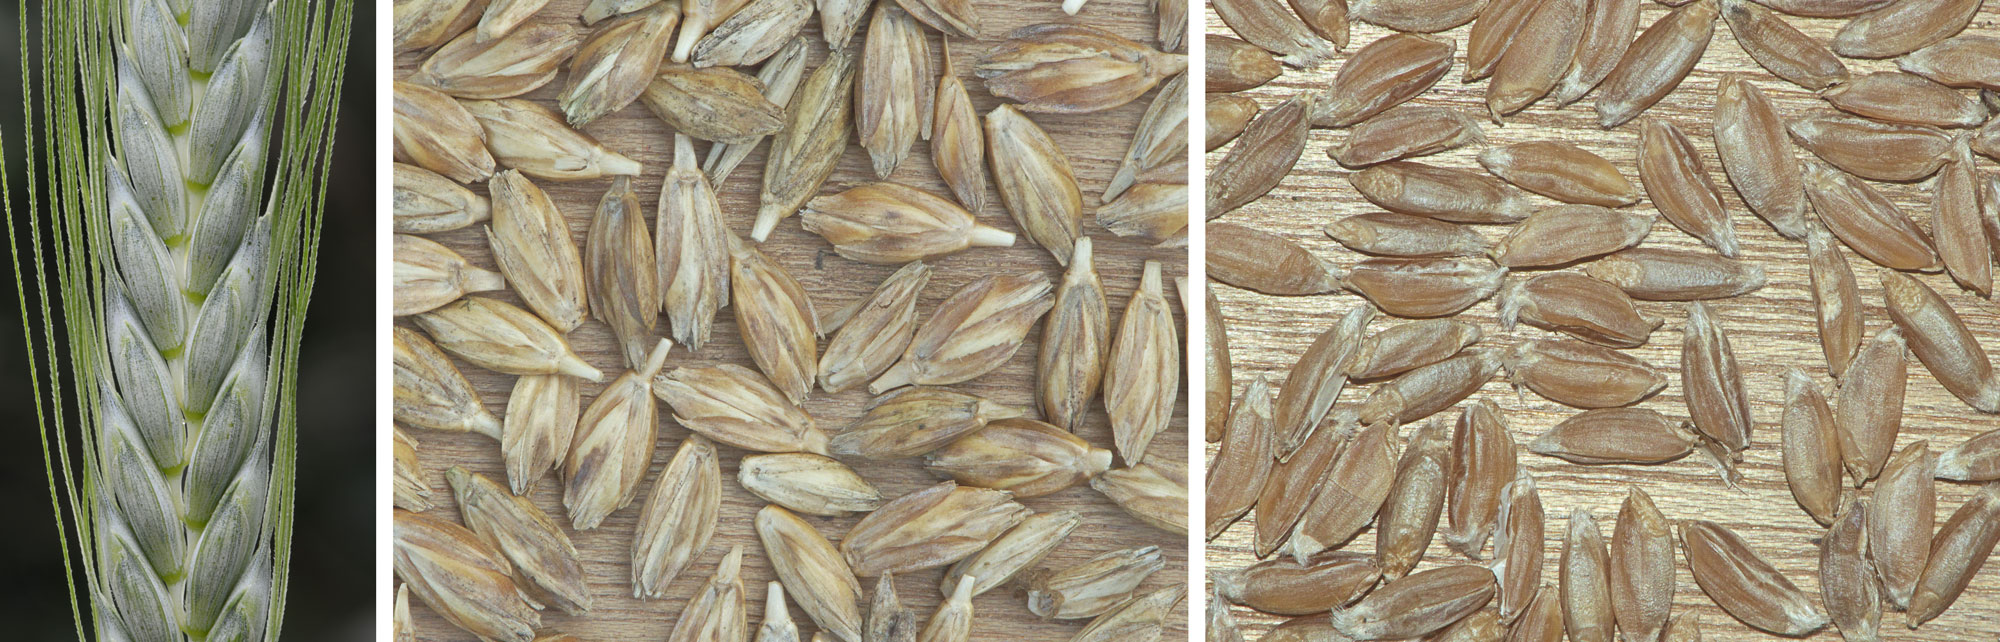 Three-panel image showing photos of emmer wheat. Panel 1: Part of an ear of emmer wheat showing spikelets attached alternately to an axis and long awns. Panel 2: Dried spikelets that were freed from the plant after threshing. The spikelets lack awns, but still have bracts attached. Panel 3: Grains after hulling, with bracts removed..